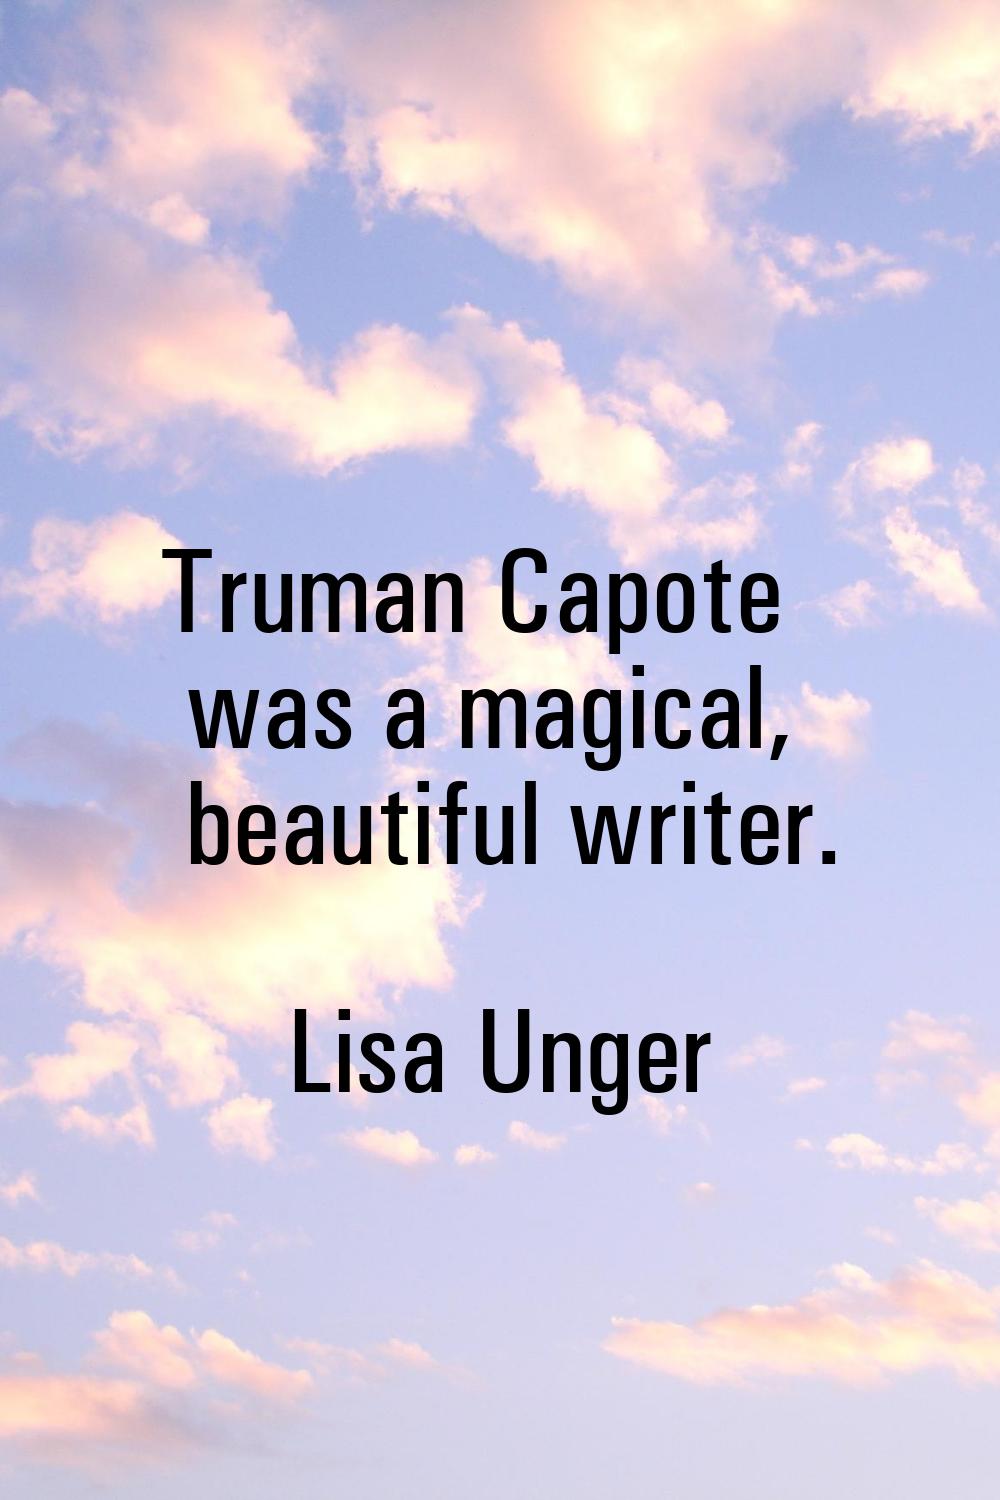 Truman Capote was a magical, beautiful writer.